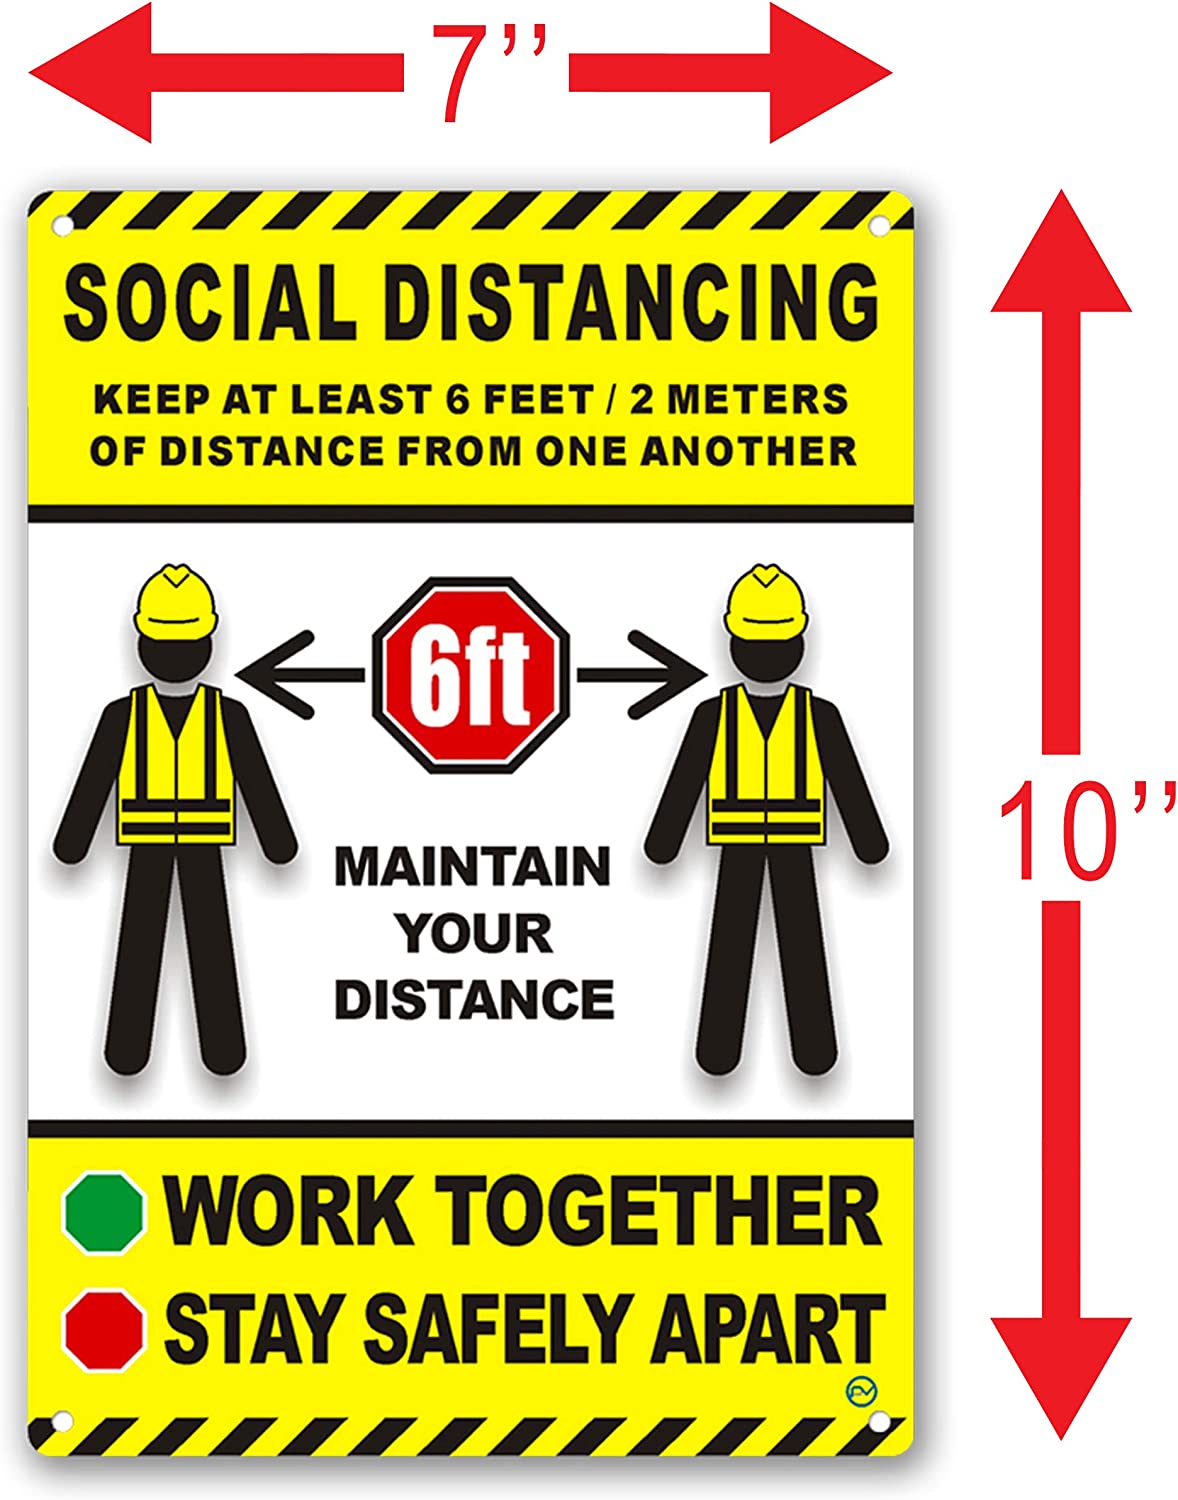 Construction Signage - High Quality Plastic (SOCIAL DISTANCING)